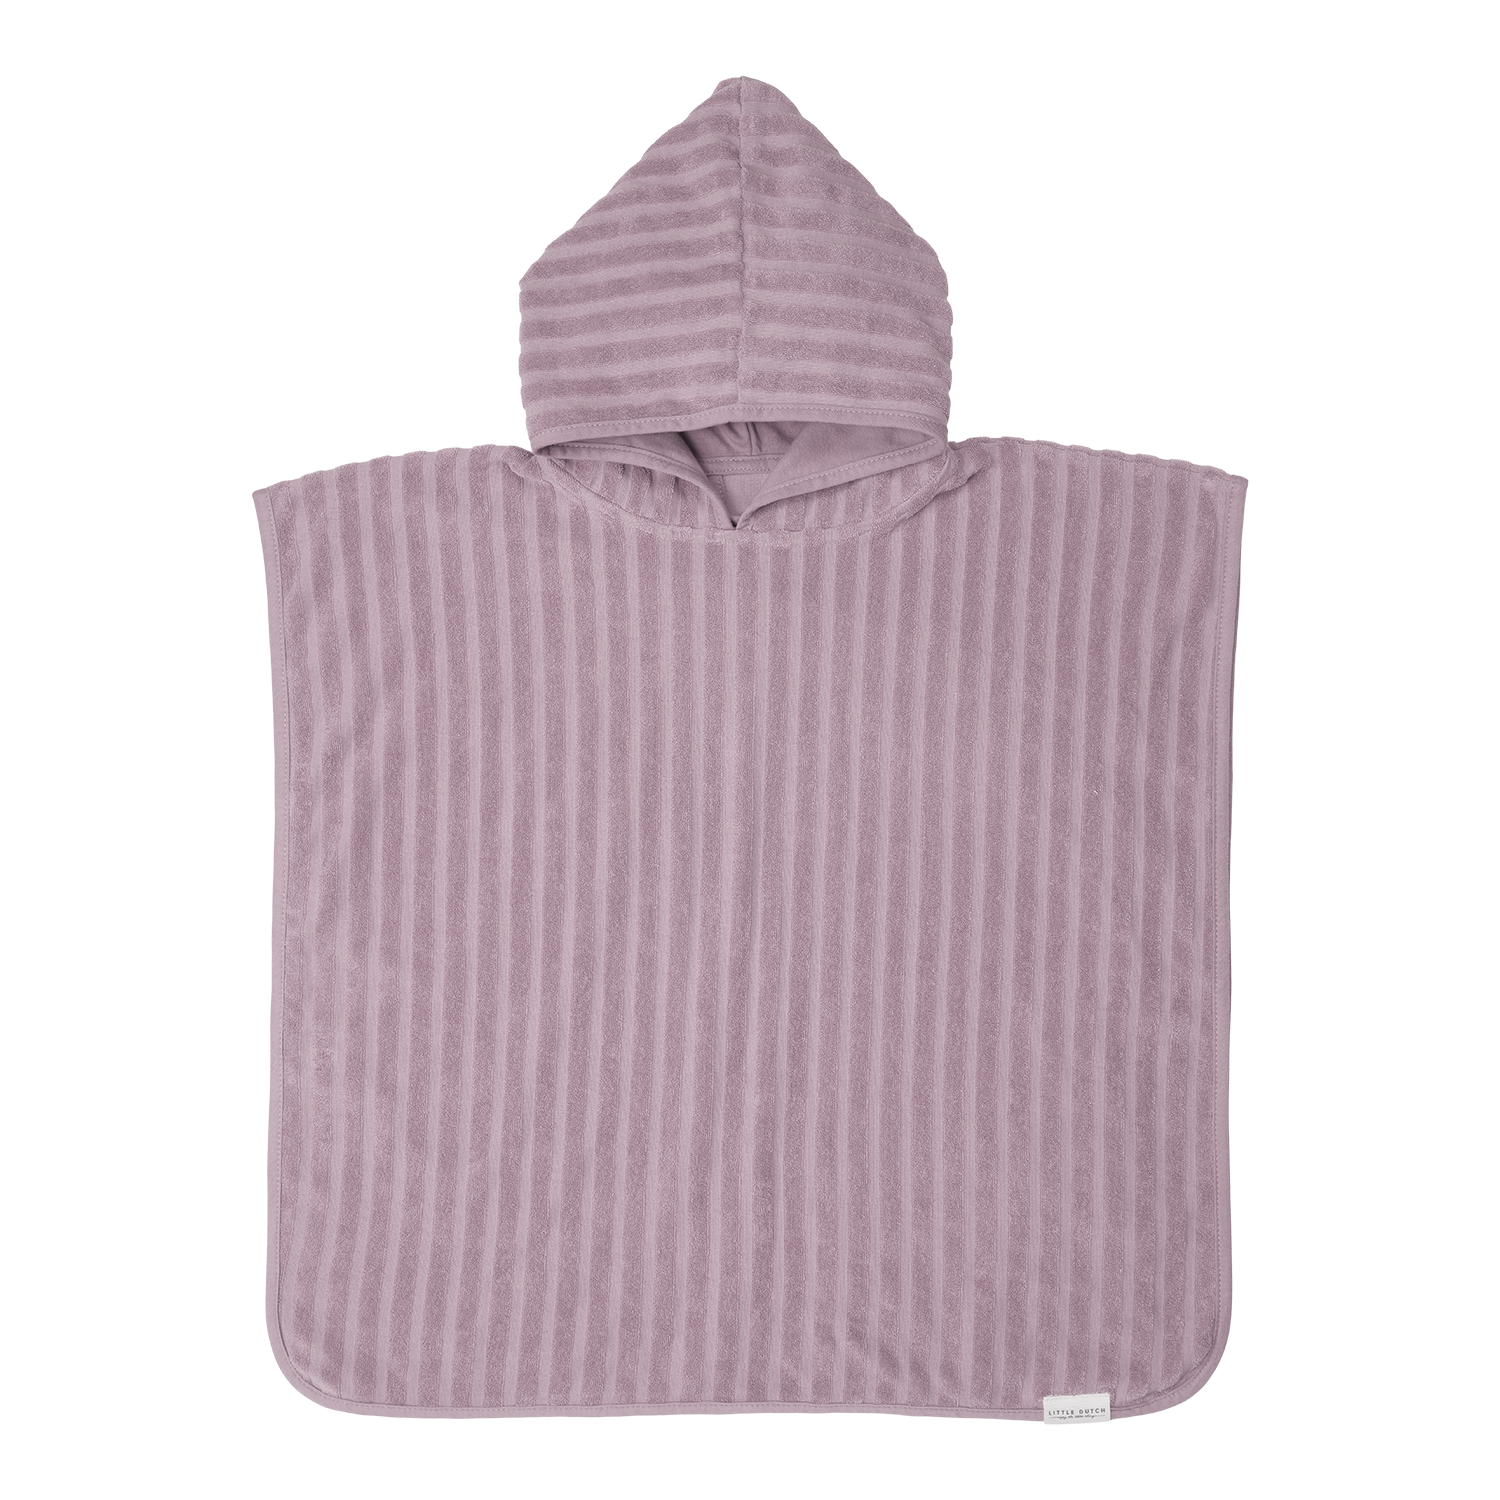 Badeponcho Frottee mauve